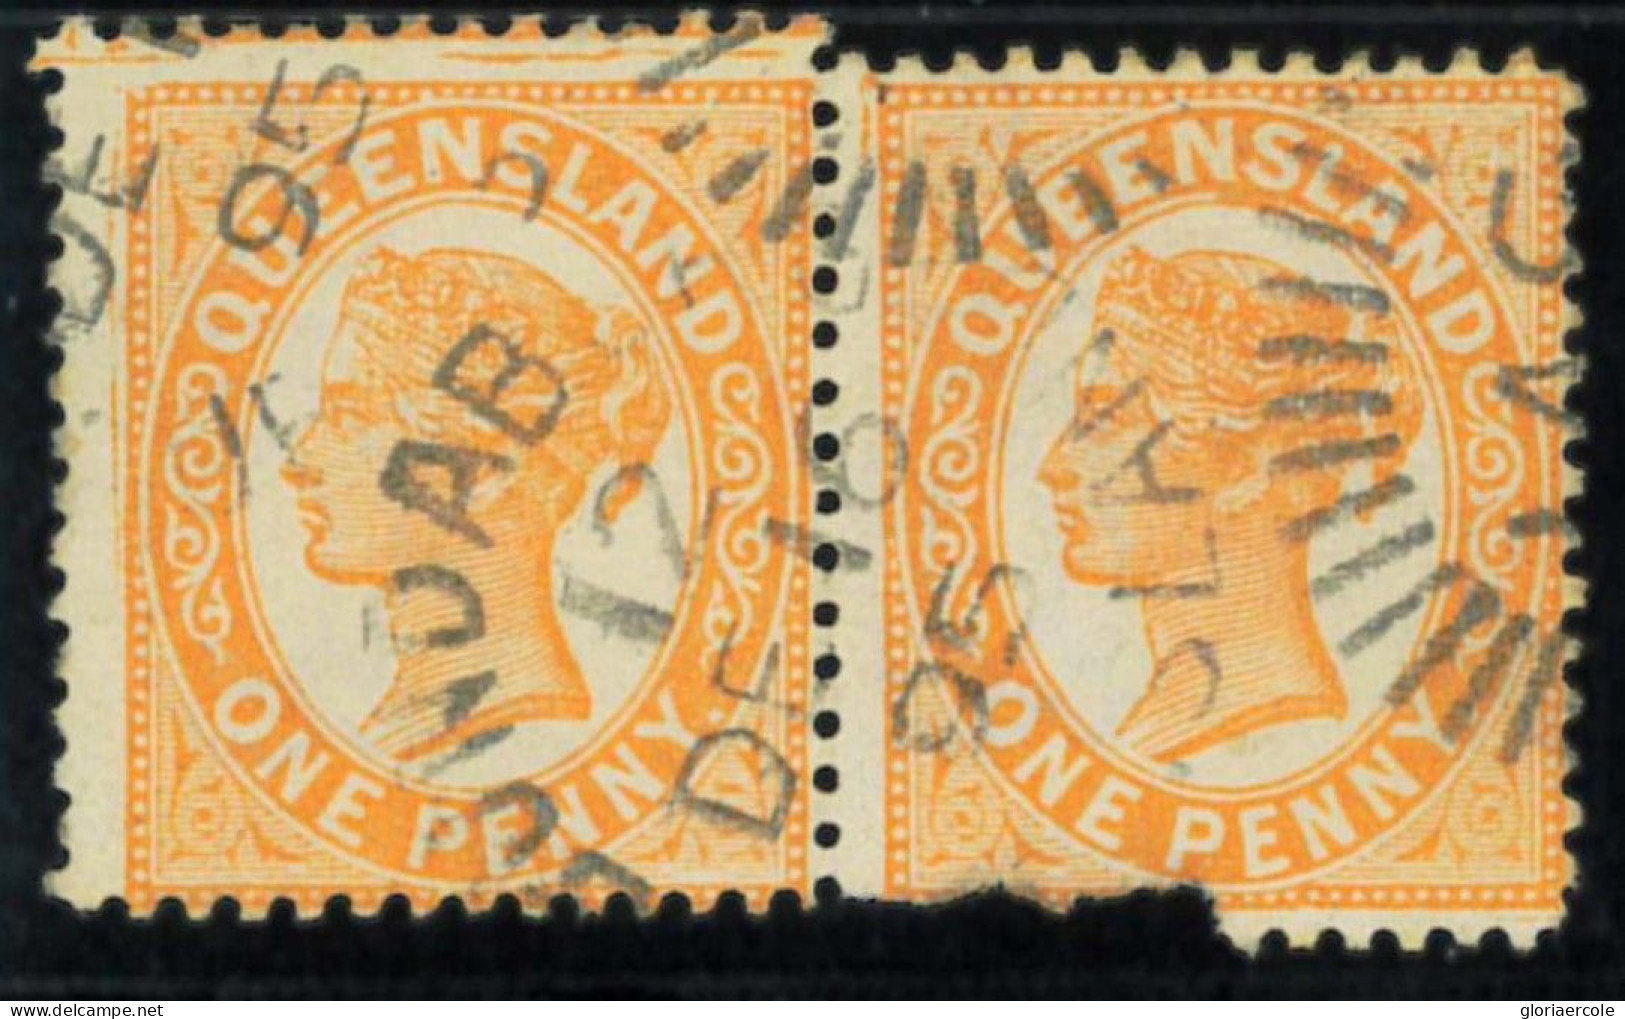 P1712 - QUEENSLAND , SG 83 IN PAIR, MISPERFORATED!!!!!! USED - Gebraucht